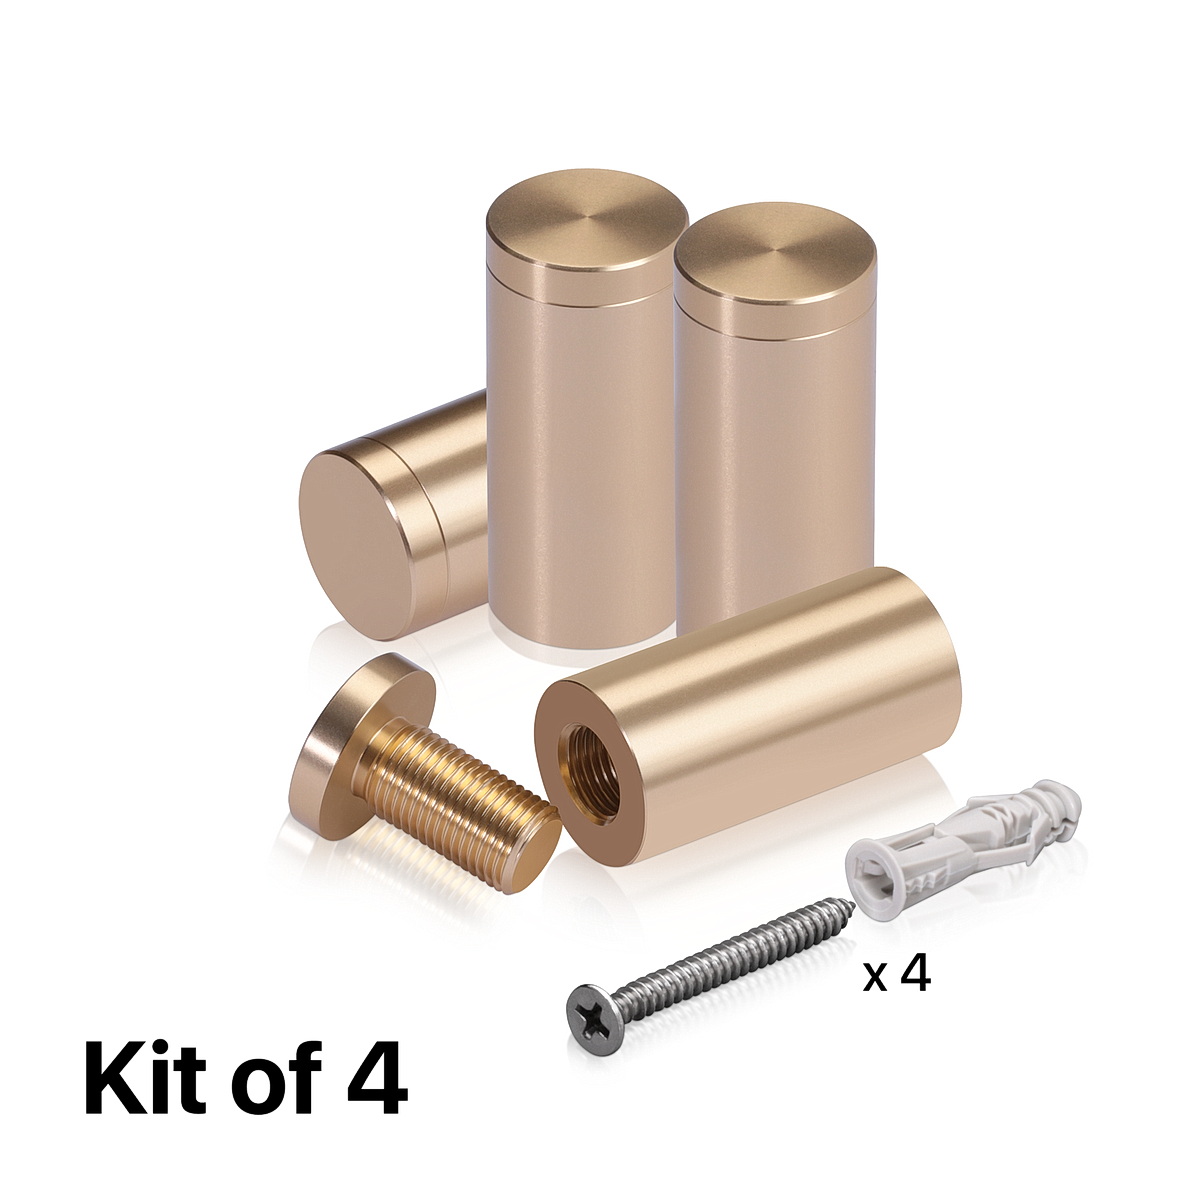 (Set of 4) 3/4'' Diameter X 1-1/2'' Barrel Length, Affordable Aluminum Standoffs, Champagne Anodized Finish Standoff and (4) 2216Z Screws and (4) LANC1 Anchors for concrete/drywall (For Inside/Outside) [Required Material Hole Size: 7/16'']